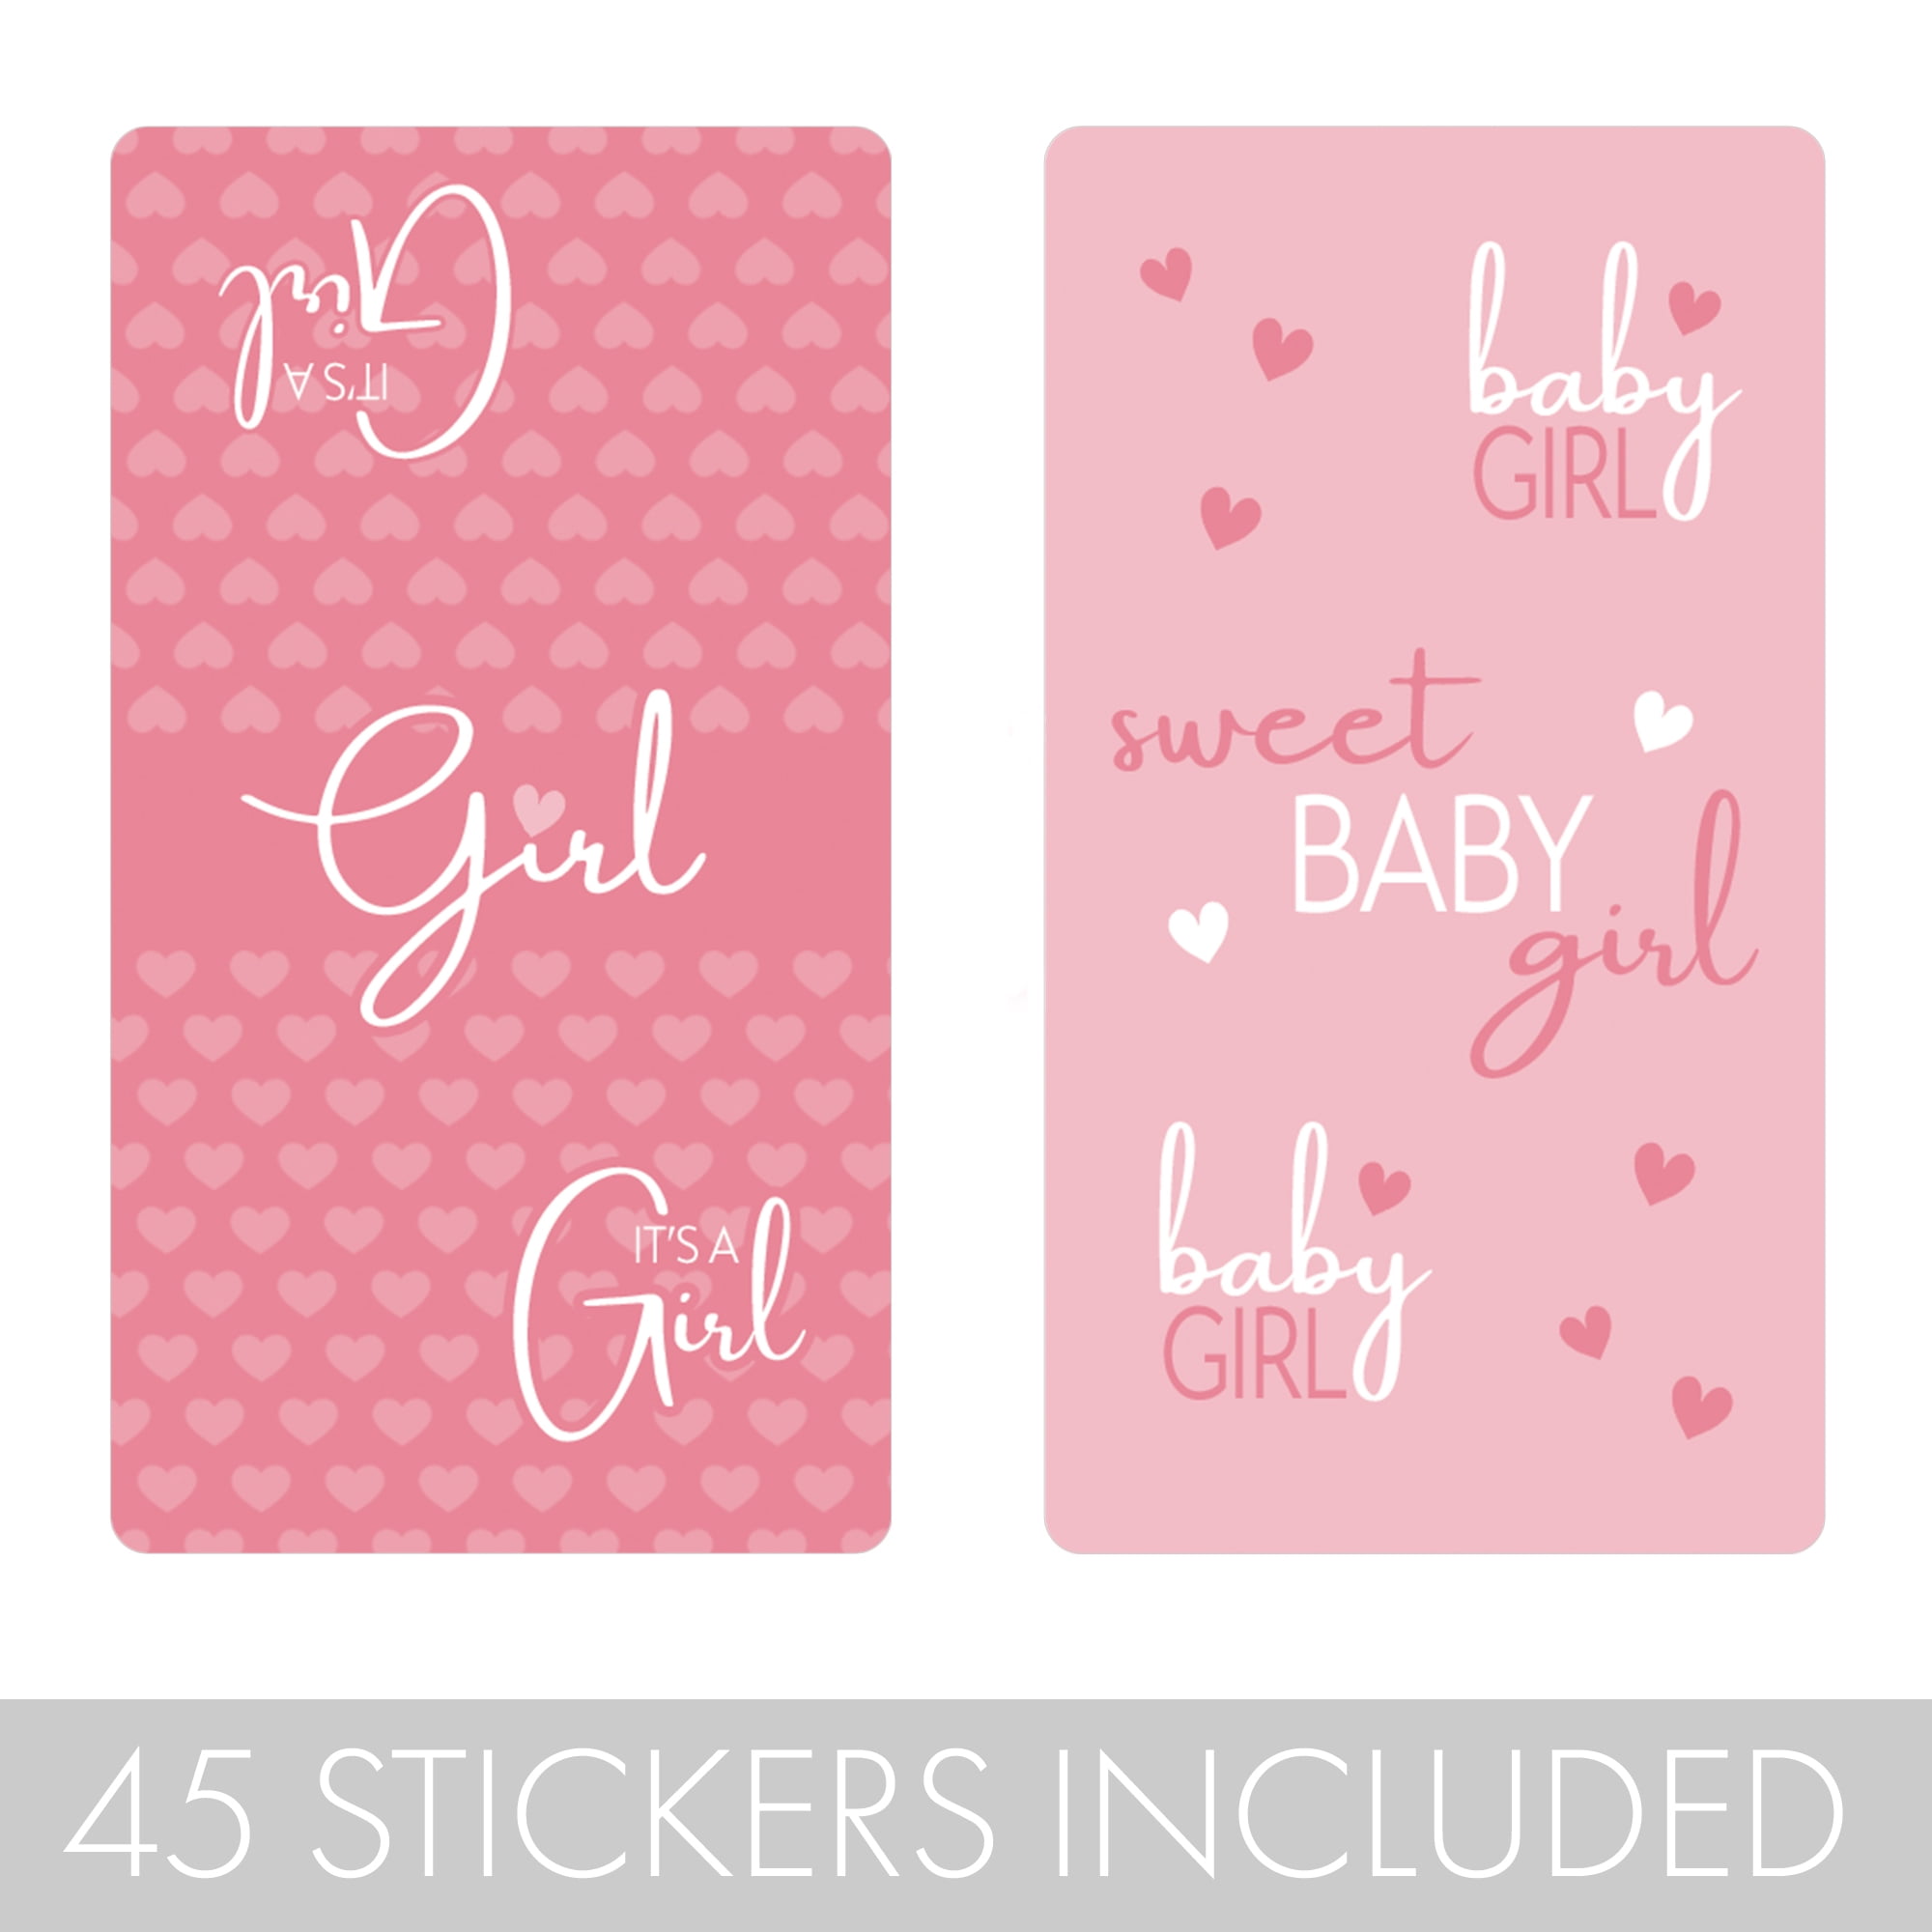 It's a Girl Pink Bow Scrapbook Stickers Baby Shower Favors Baby Girl  Stickers